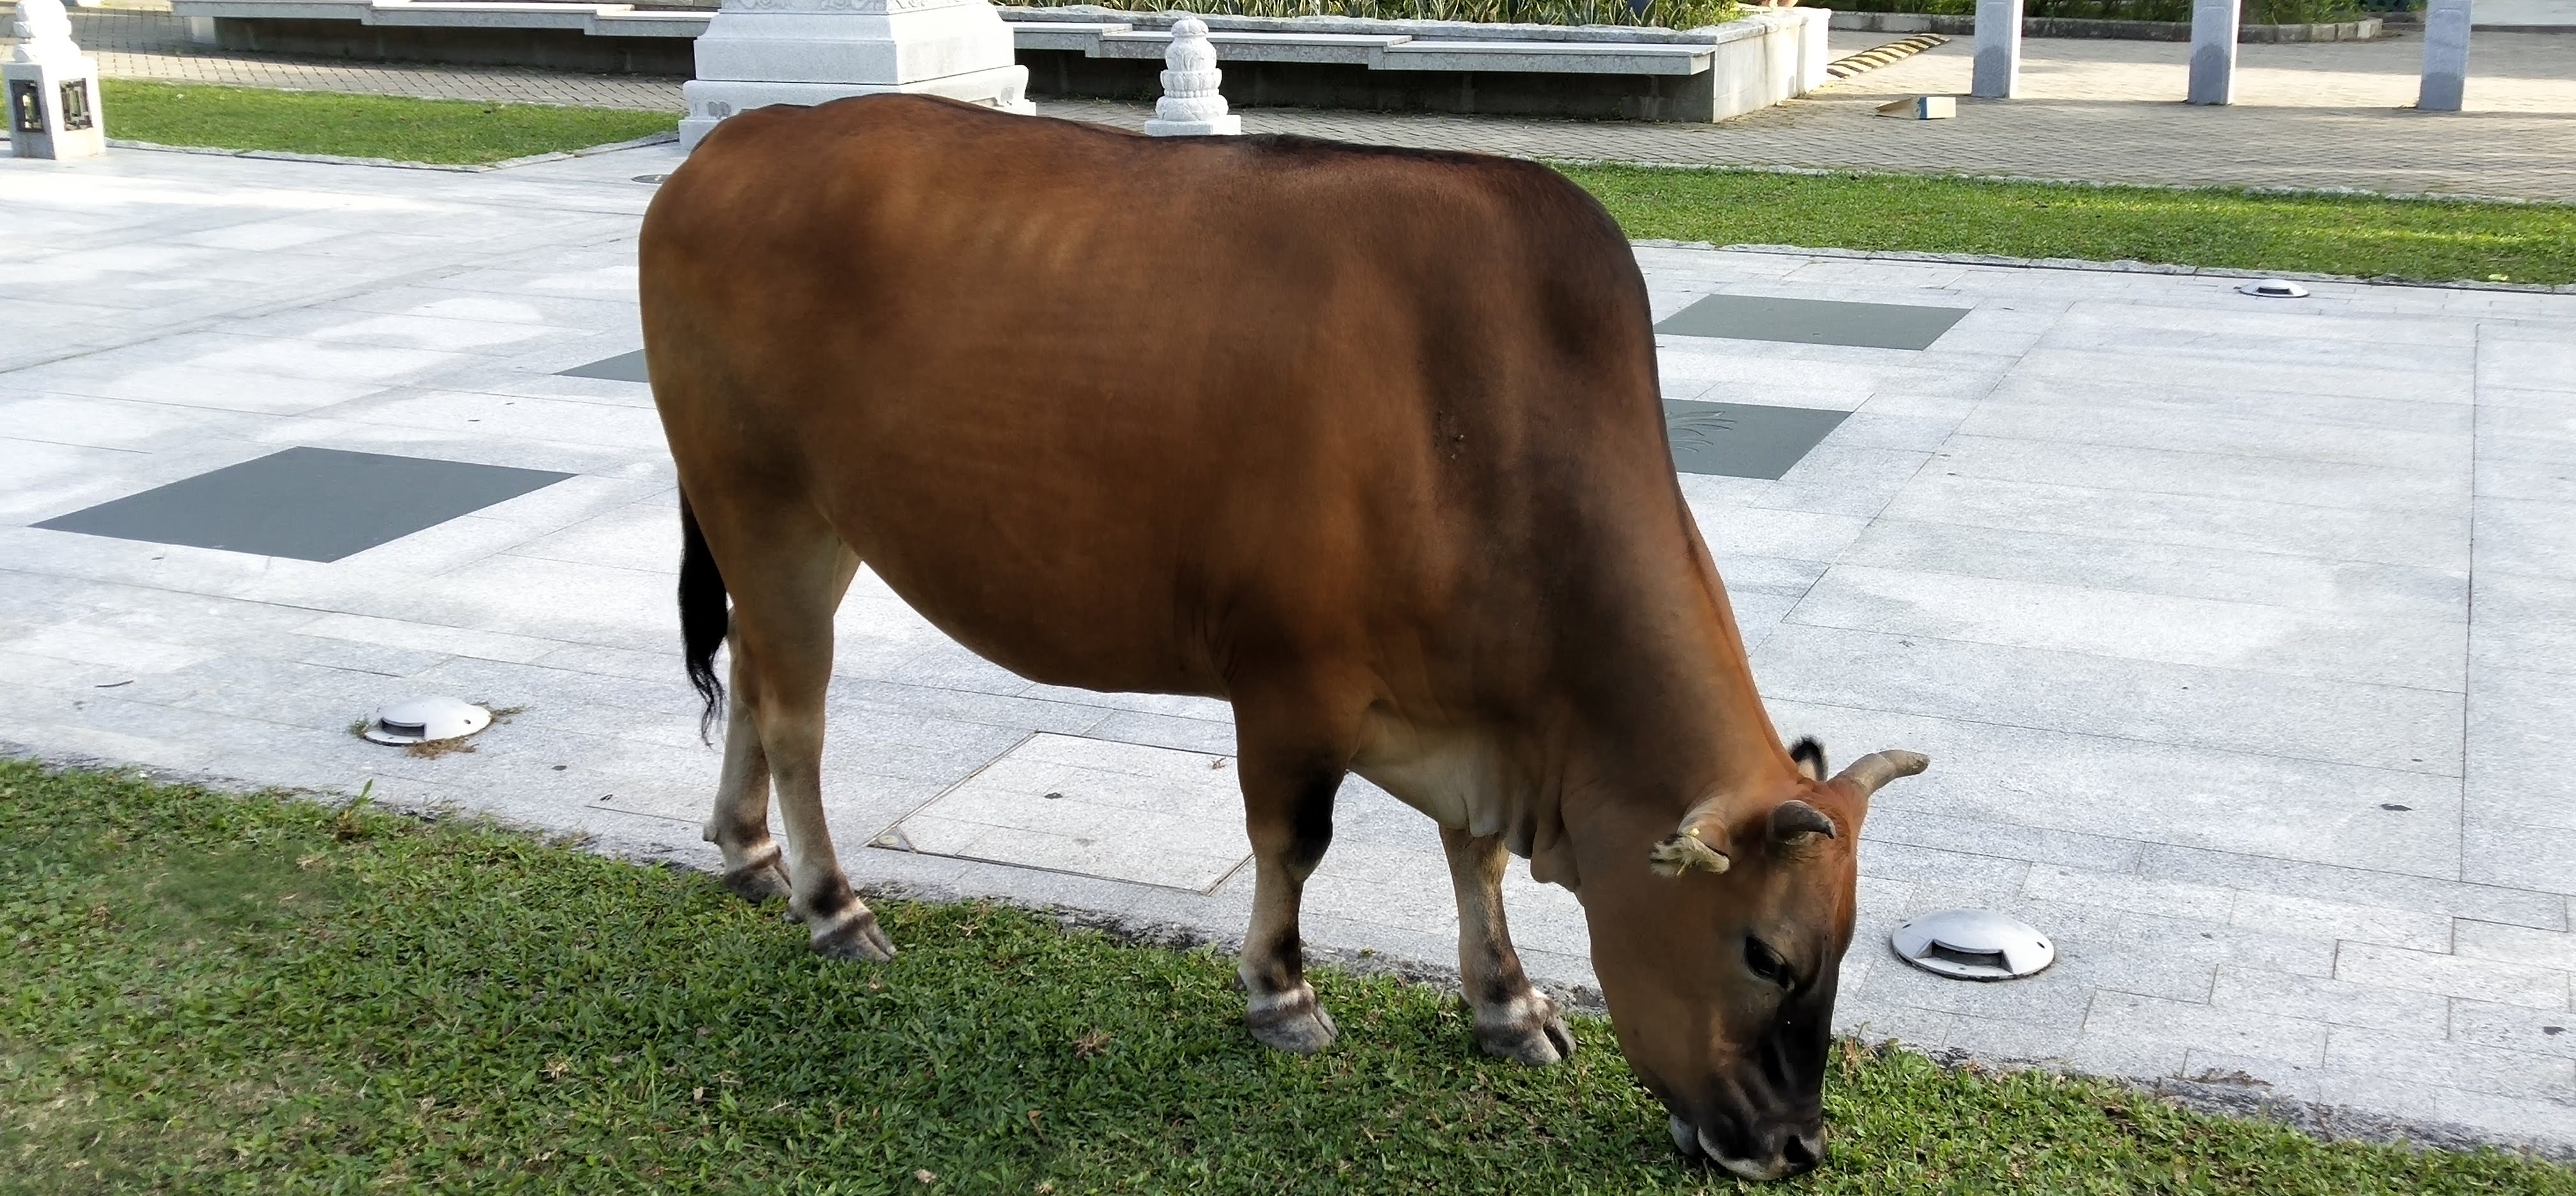 Cow is eating grass